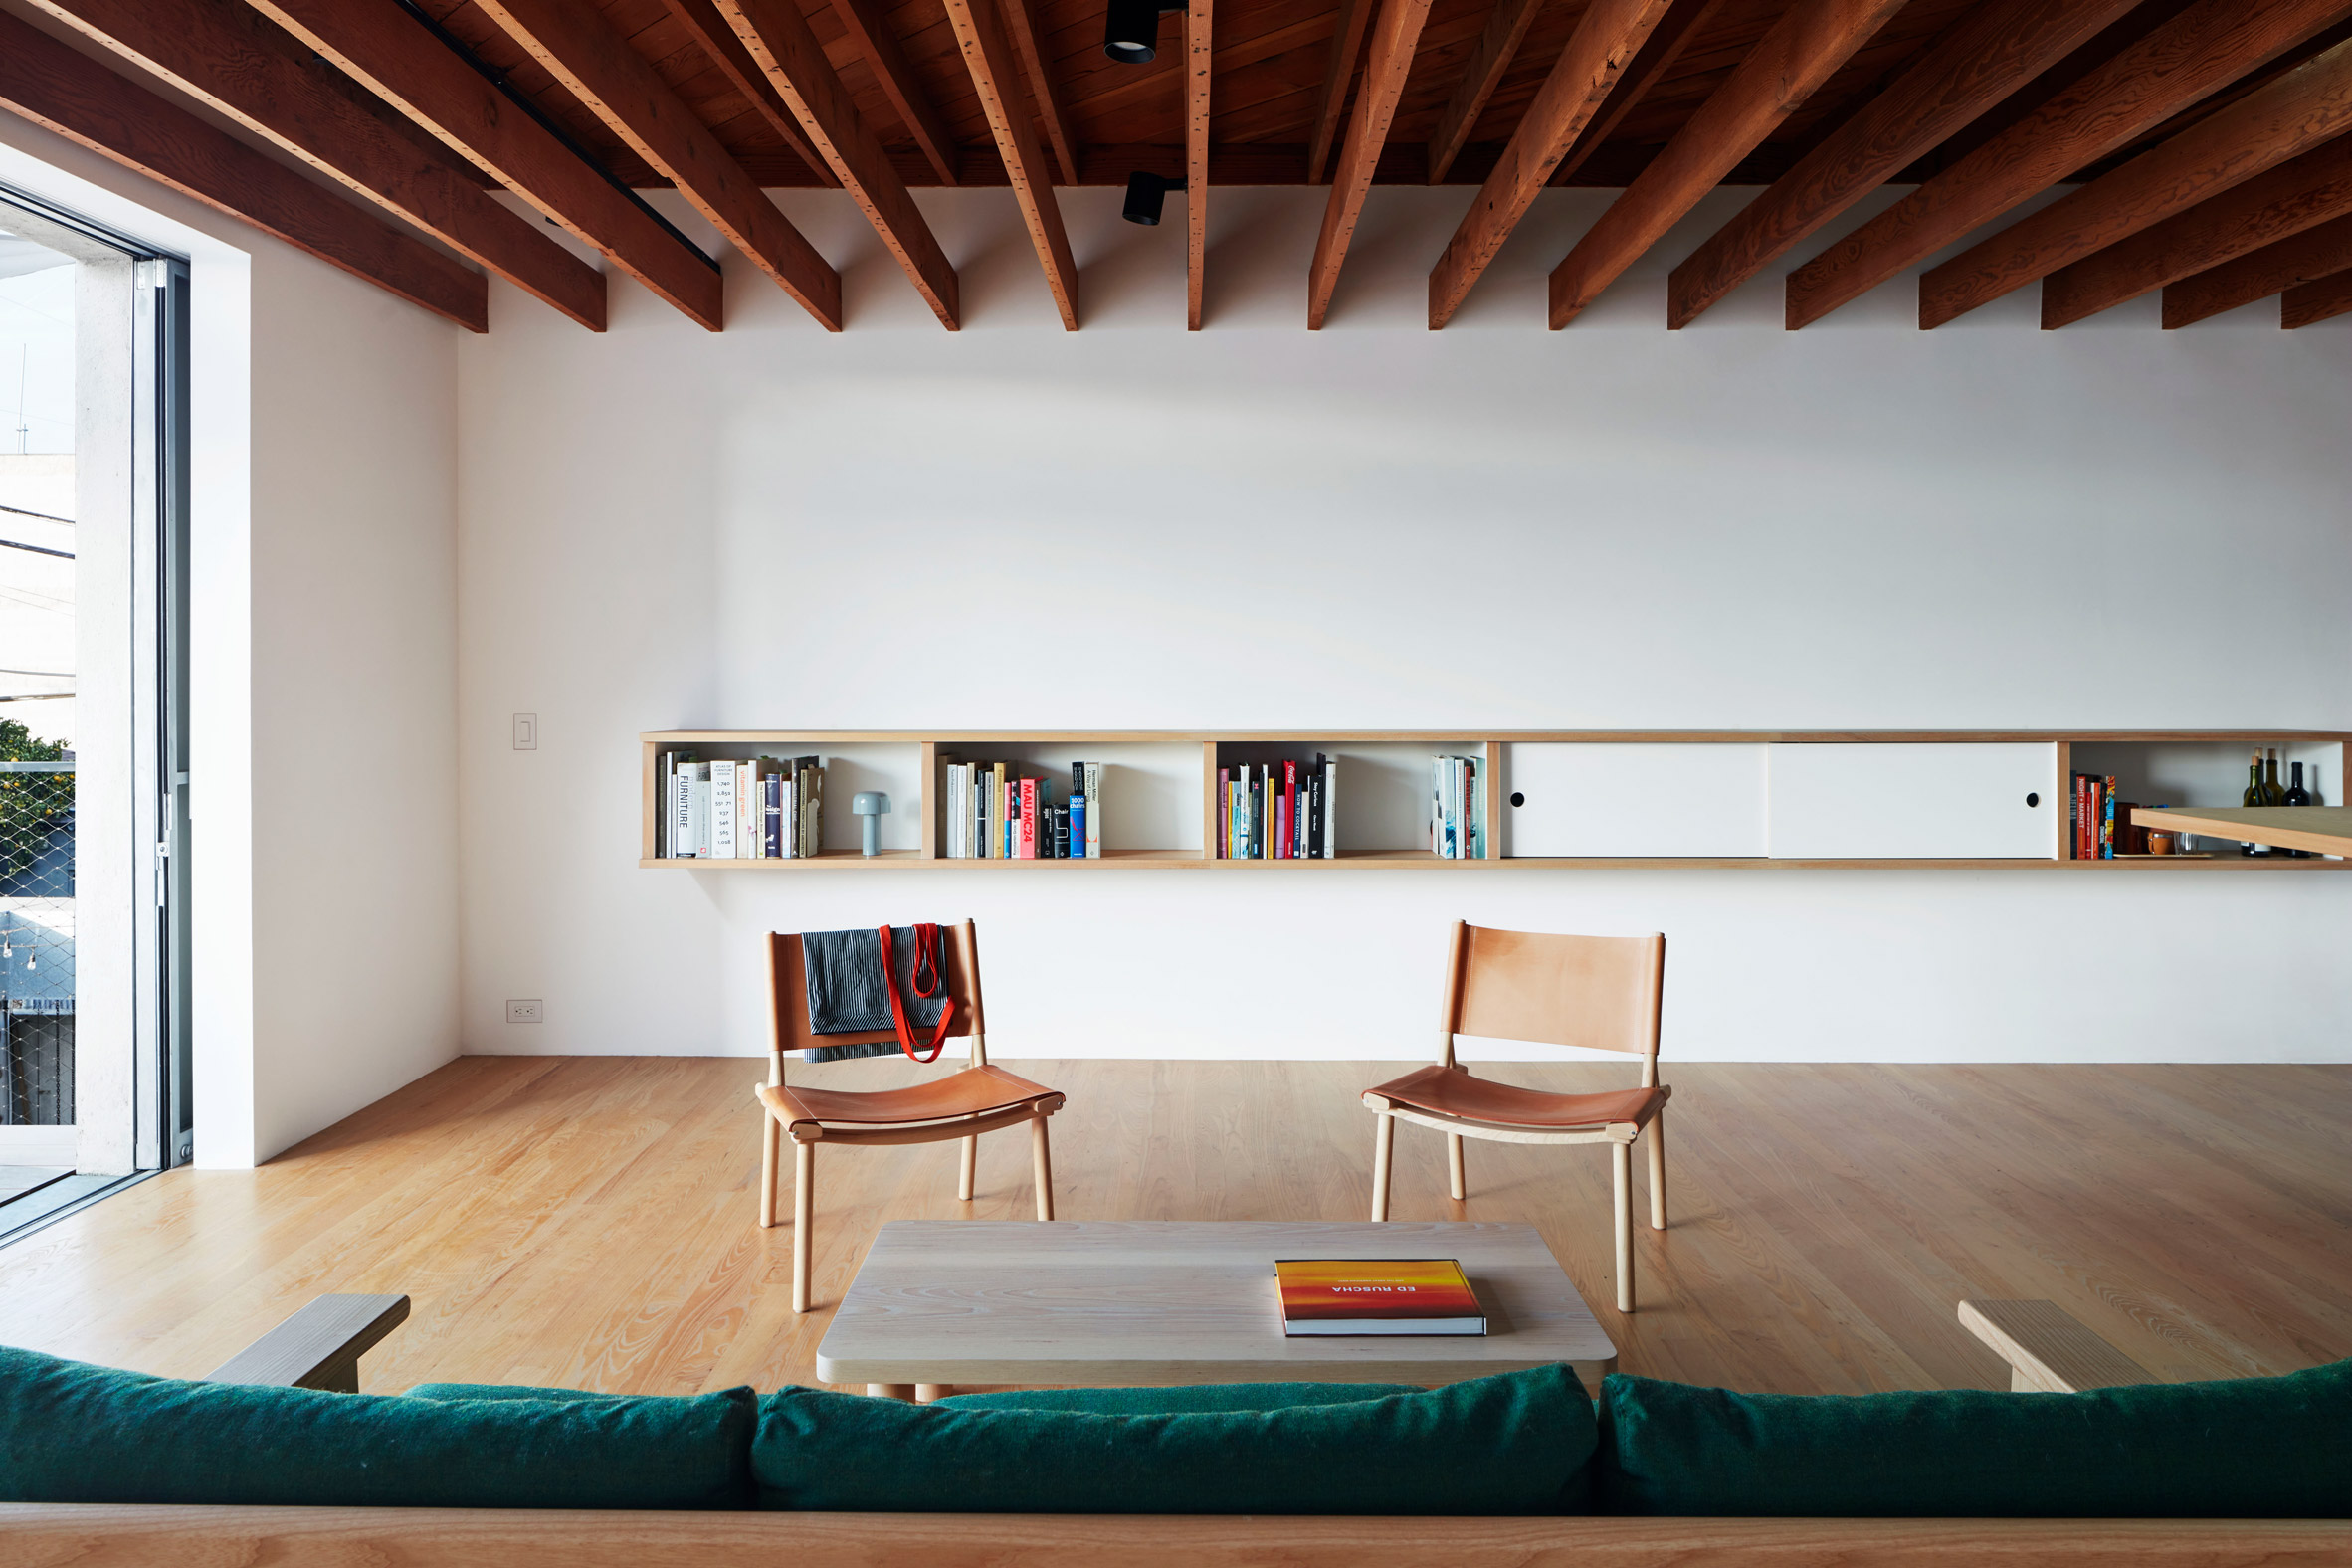 Upstairs sitting area at Emeco House by David Saik with two chairs around a coffee table and sofa 